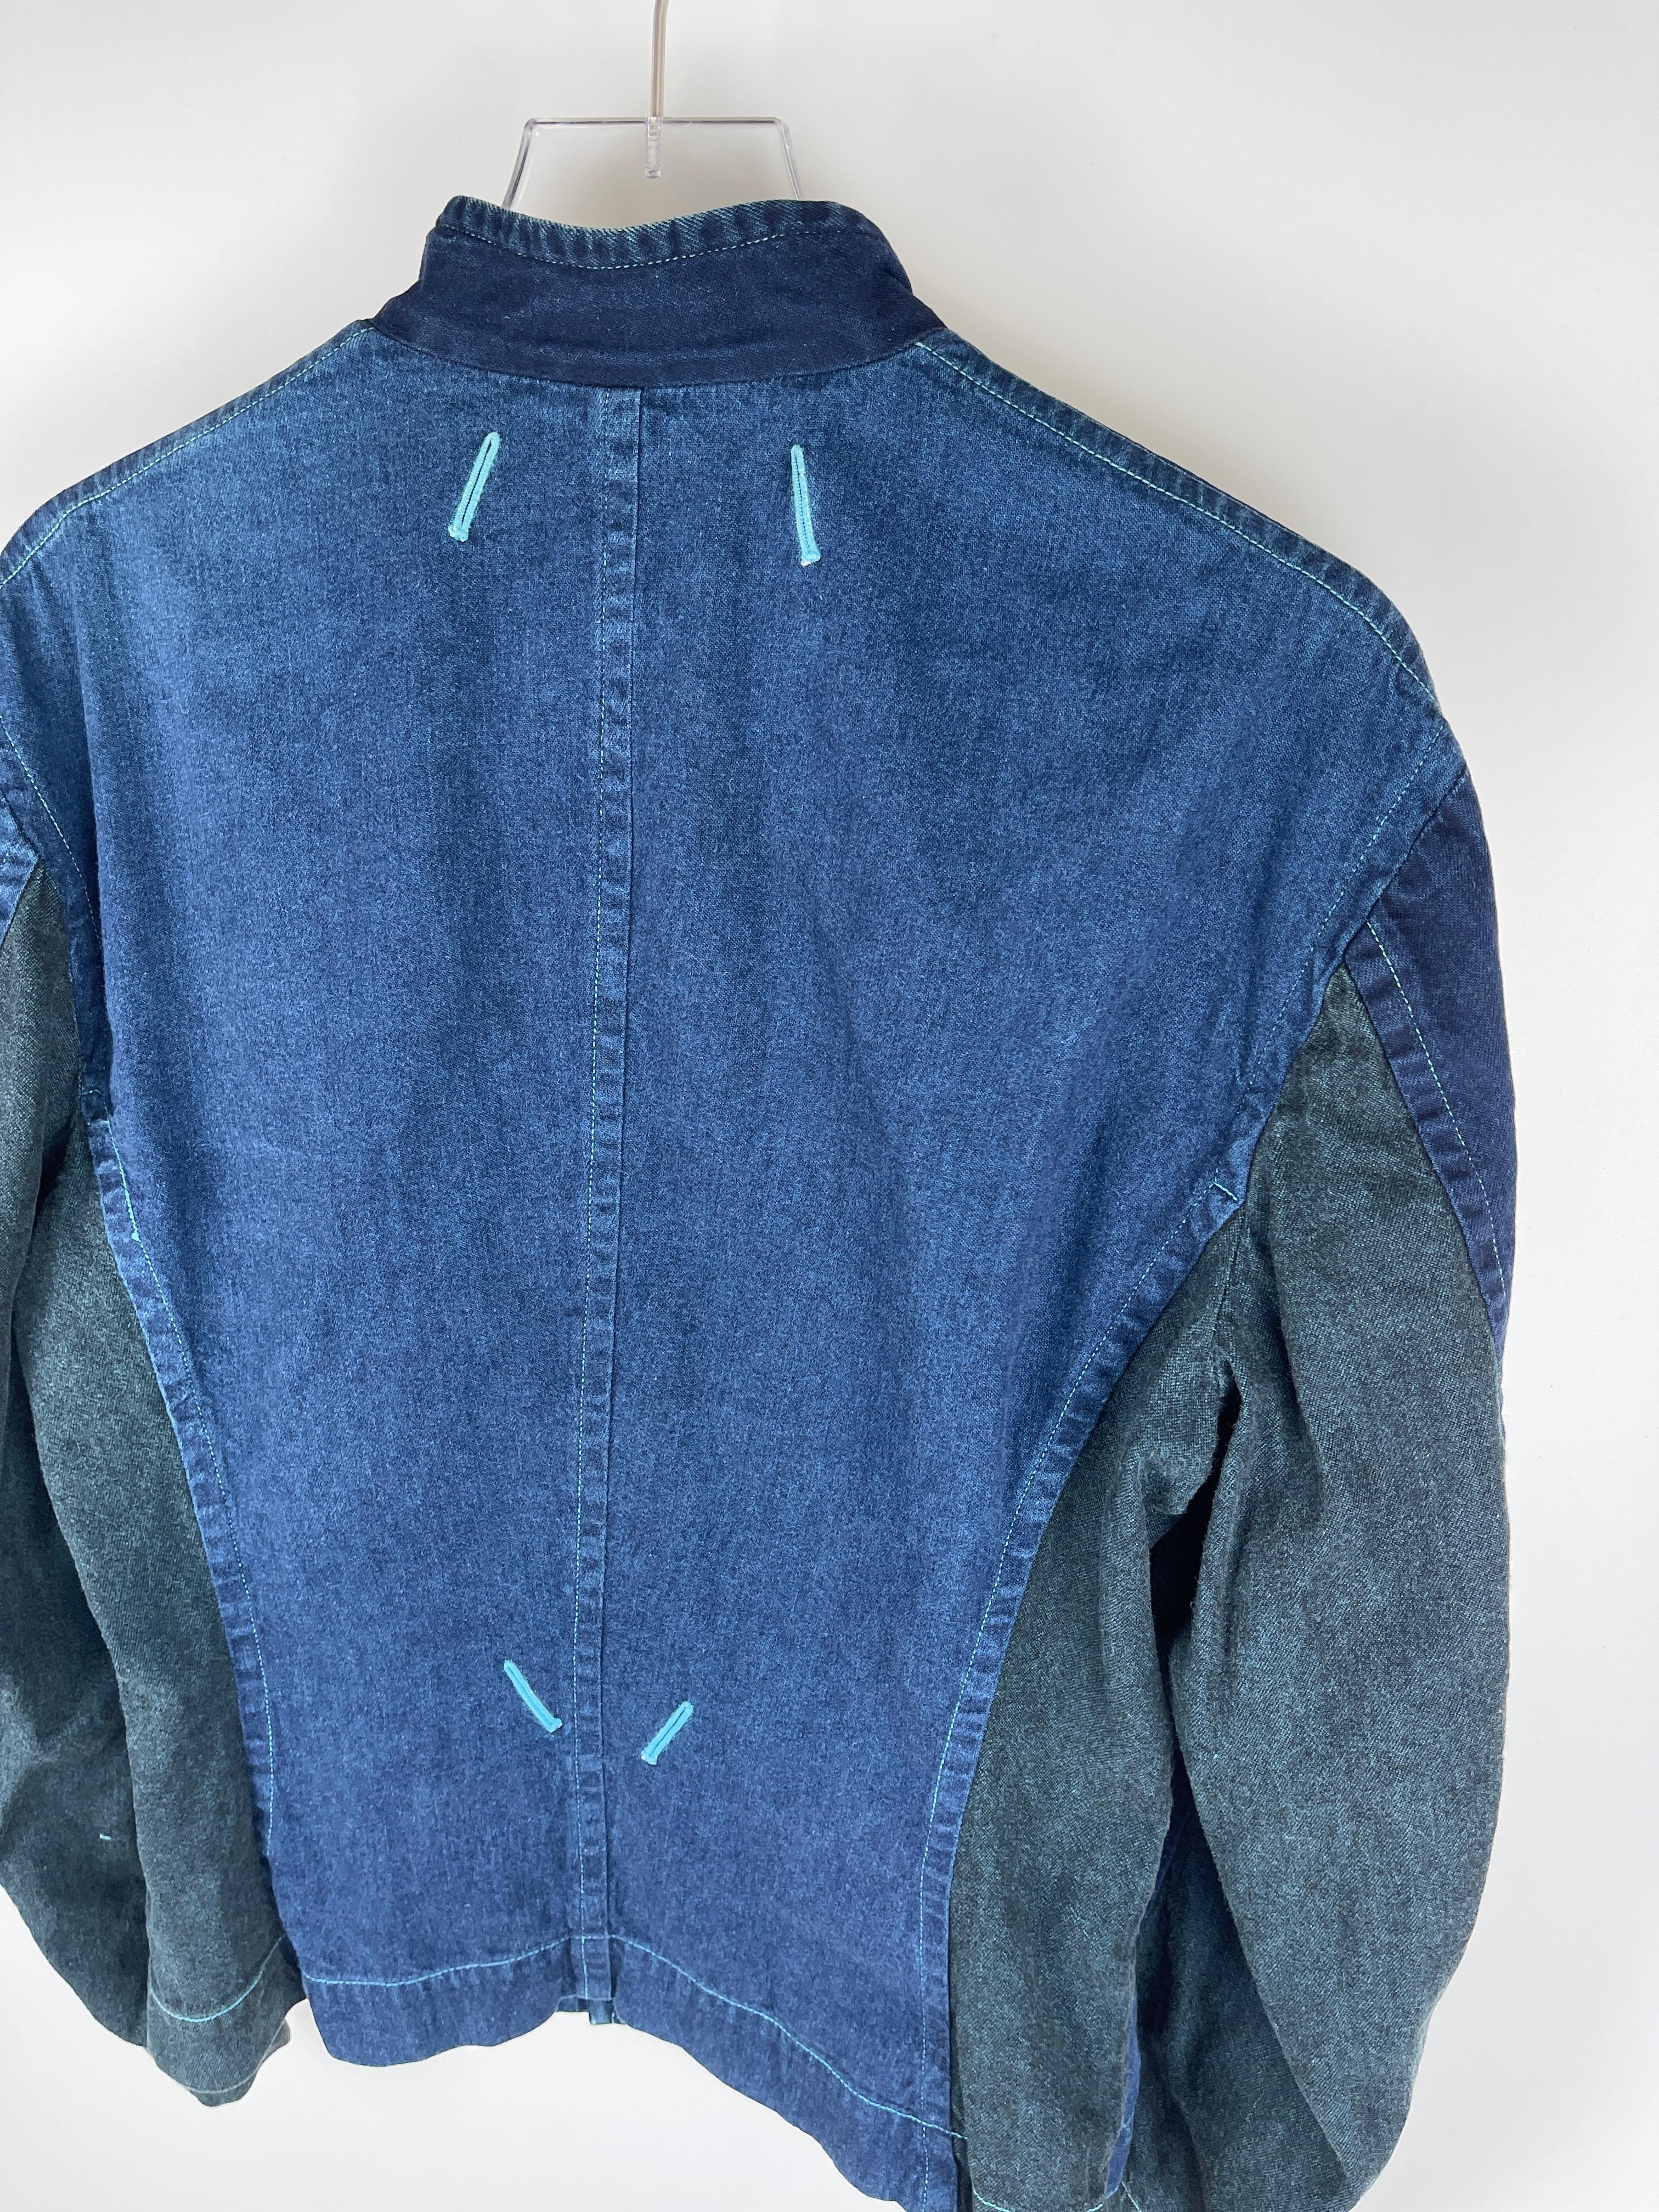 Issey Miyake A/W1993 Chambre Denim Jacket  In Excellent Condition For Sale In Tương Mai Ward, Hoang Mai District